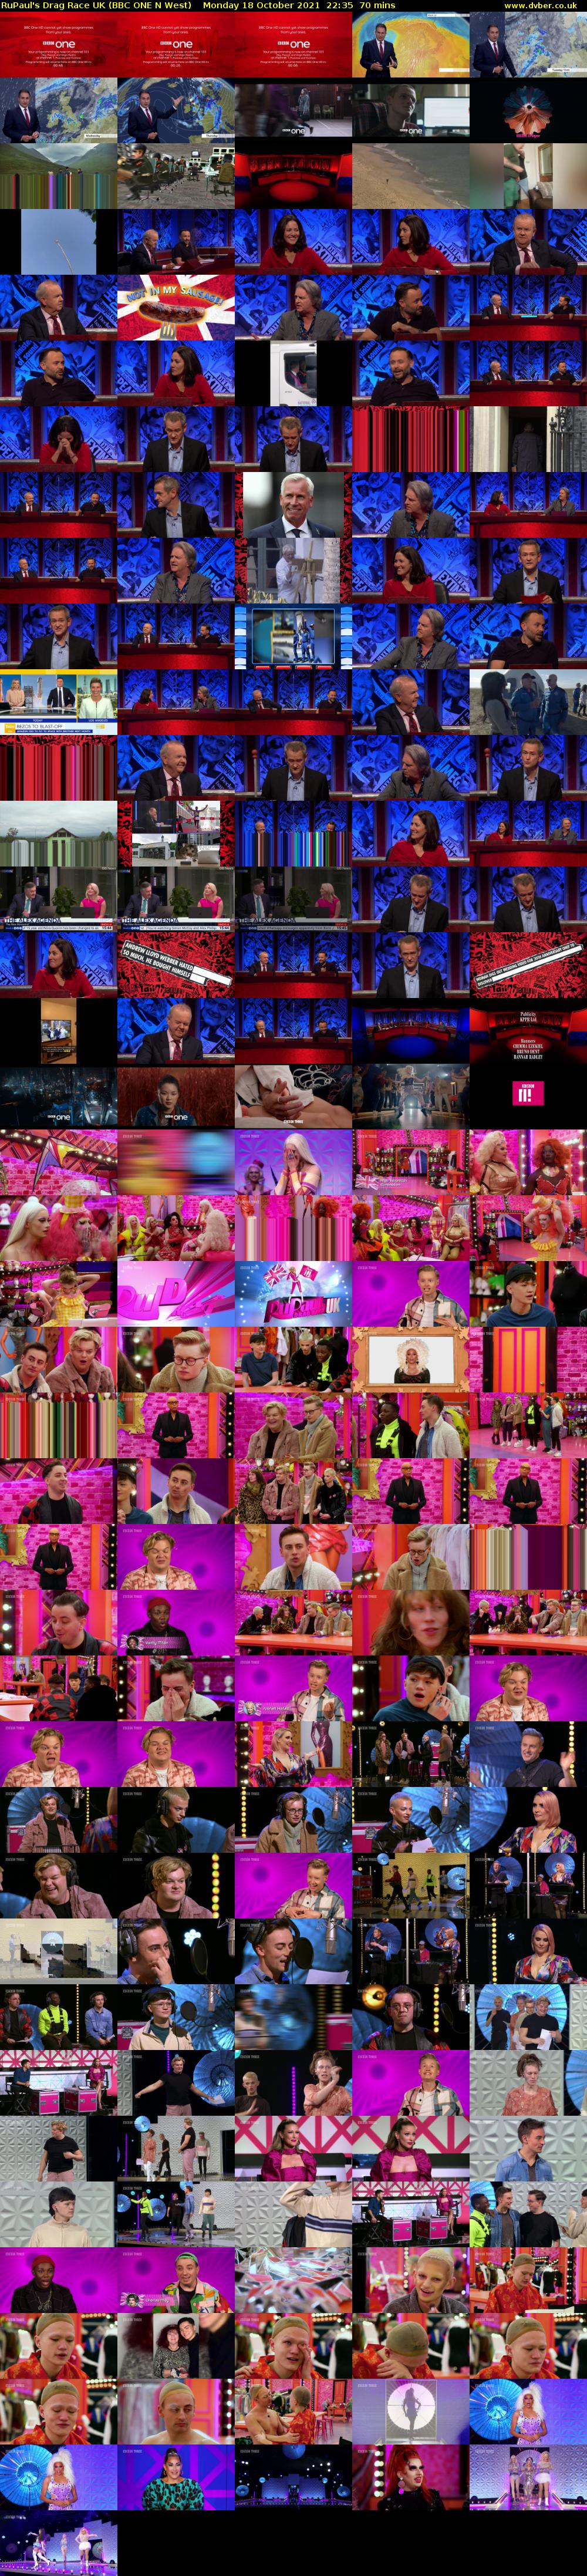 RuPaul's Drag Race UK (BBC ONE N West) Monday 18 October 2021 22:35 - 23:45